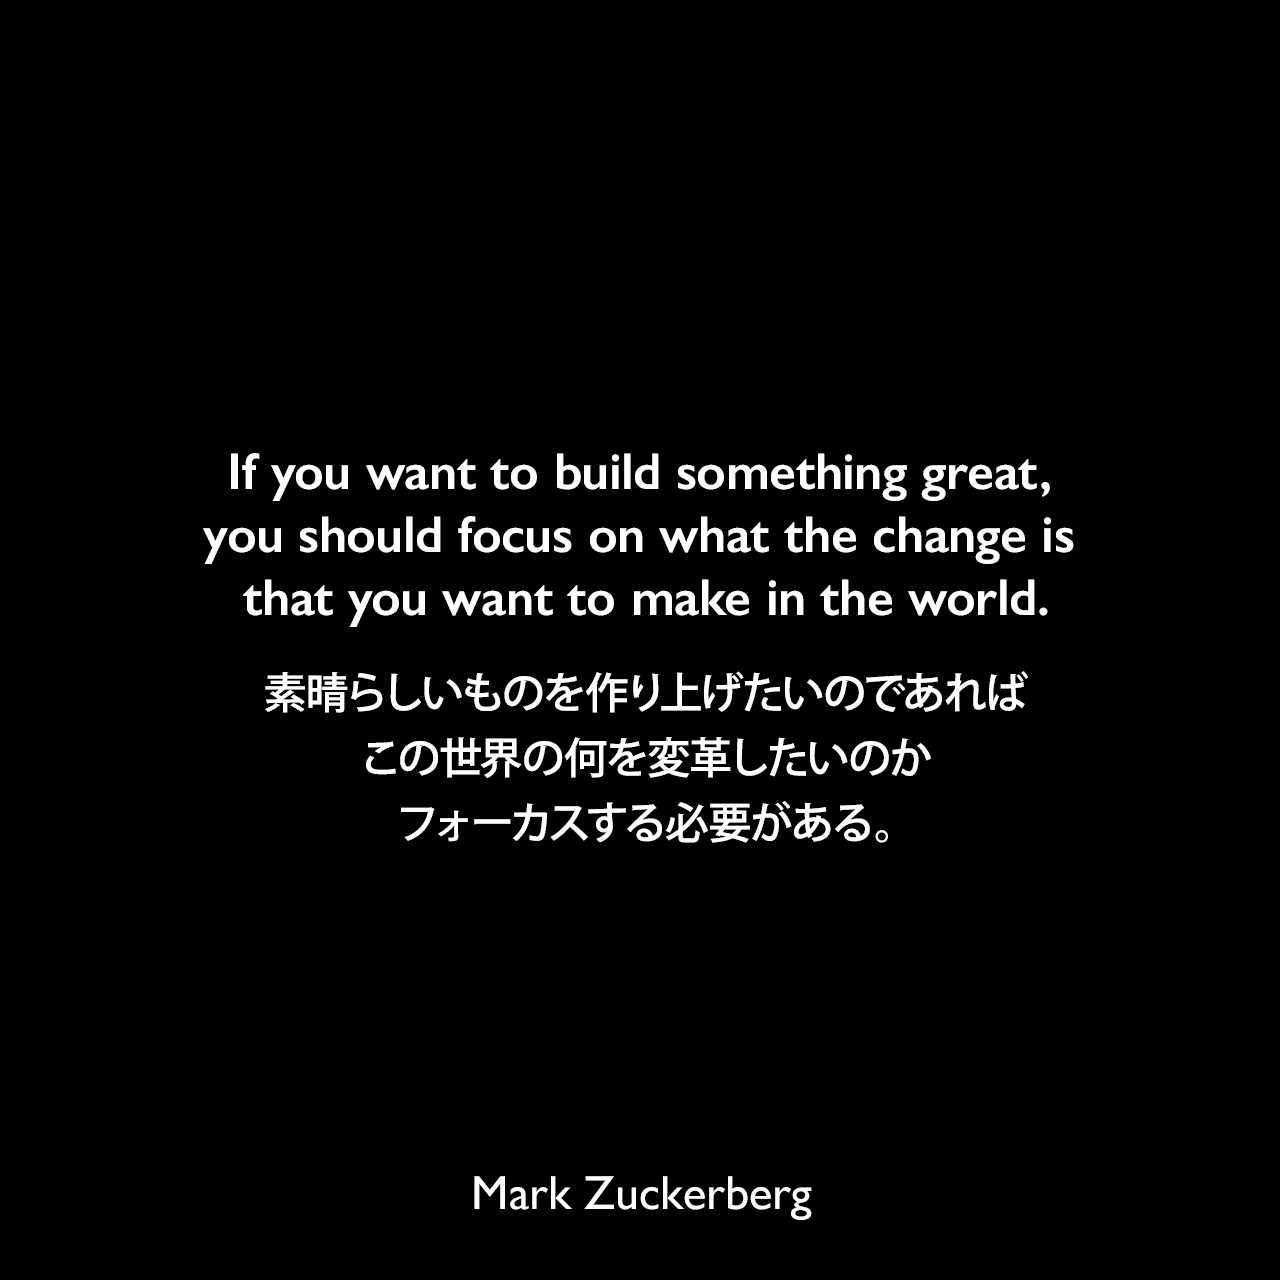 If you want to build something great, you should focus on what the change is that you want to make in the world.素晴らしいものを作り上げたいのであれば、この世界の何を変革したいのかフォーカスする必要がある。Mark Zuckerberg